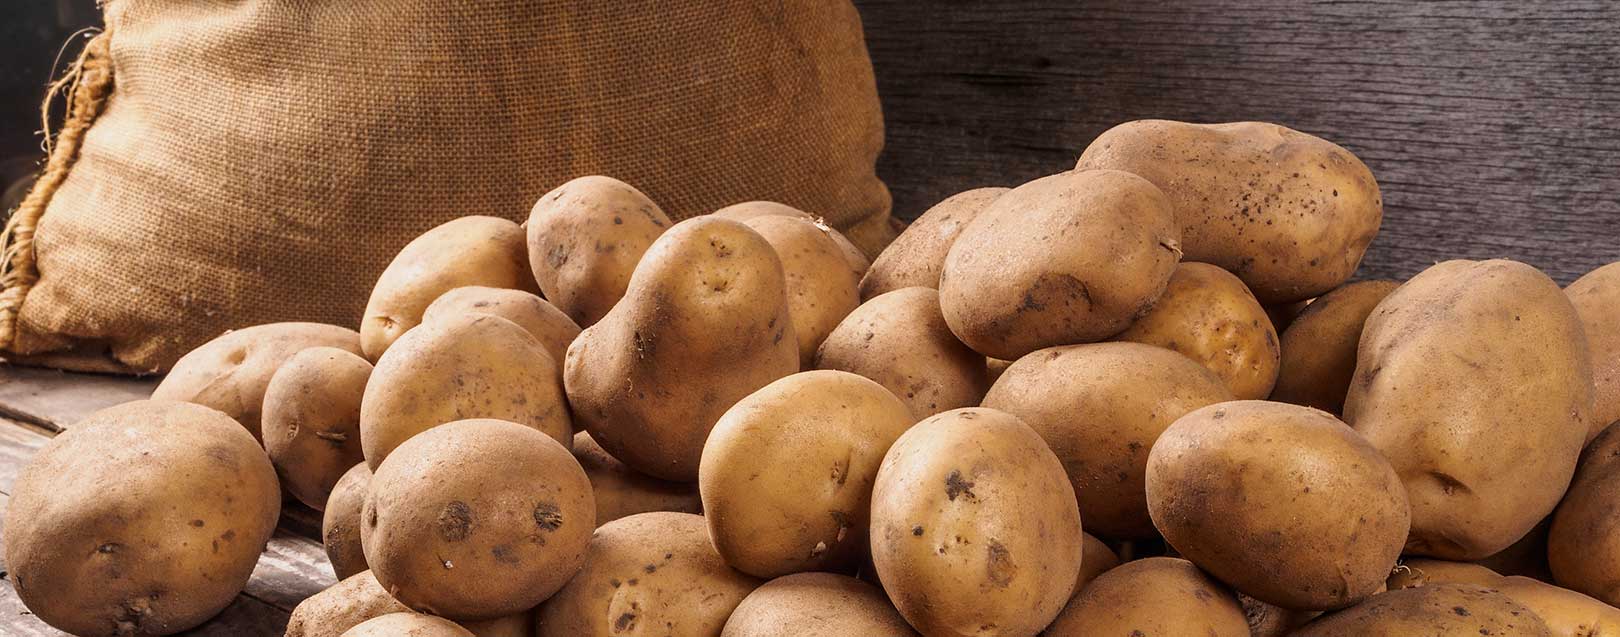 Potato production in India to be at 47 MT this year